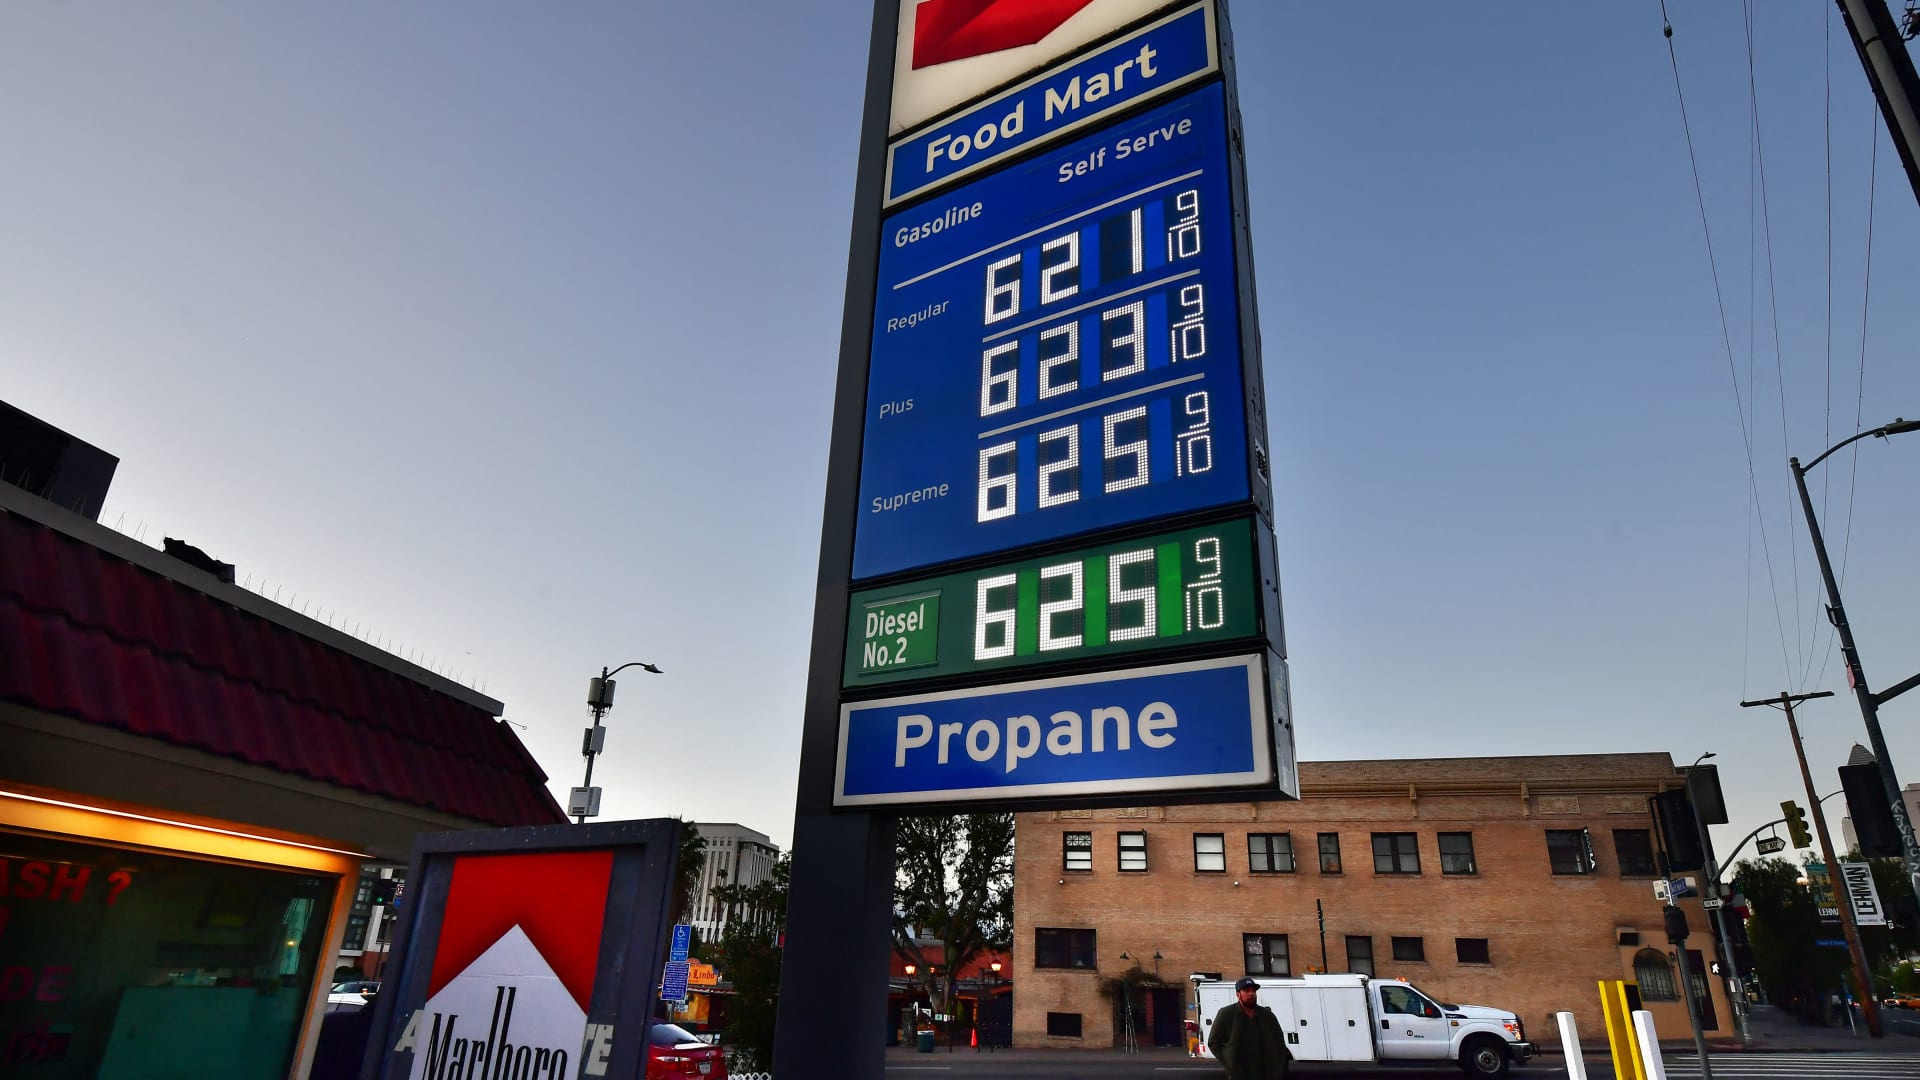 Gas prices hit over $6 dollars per gallon at a petrol station in Los Angeles, California on February 23, 2022.